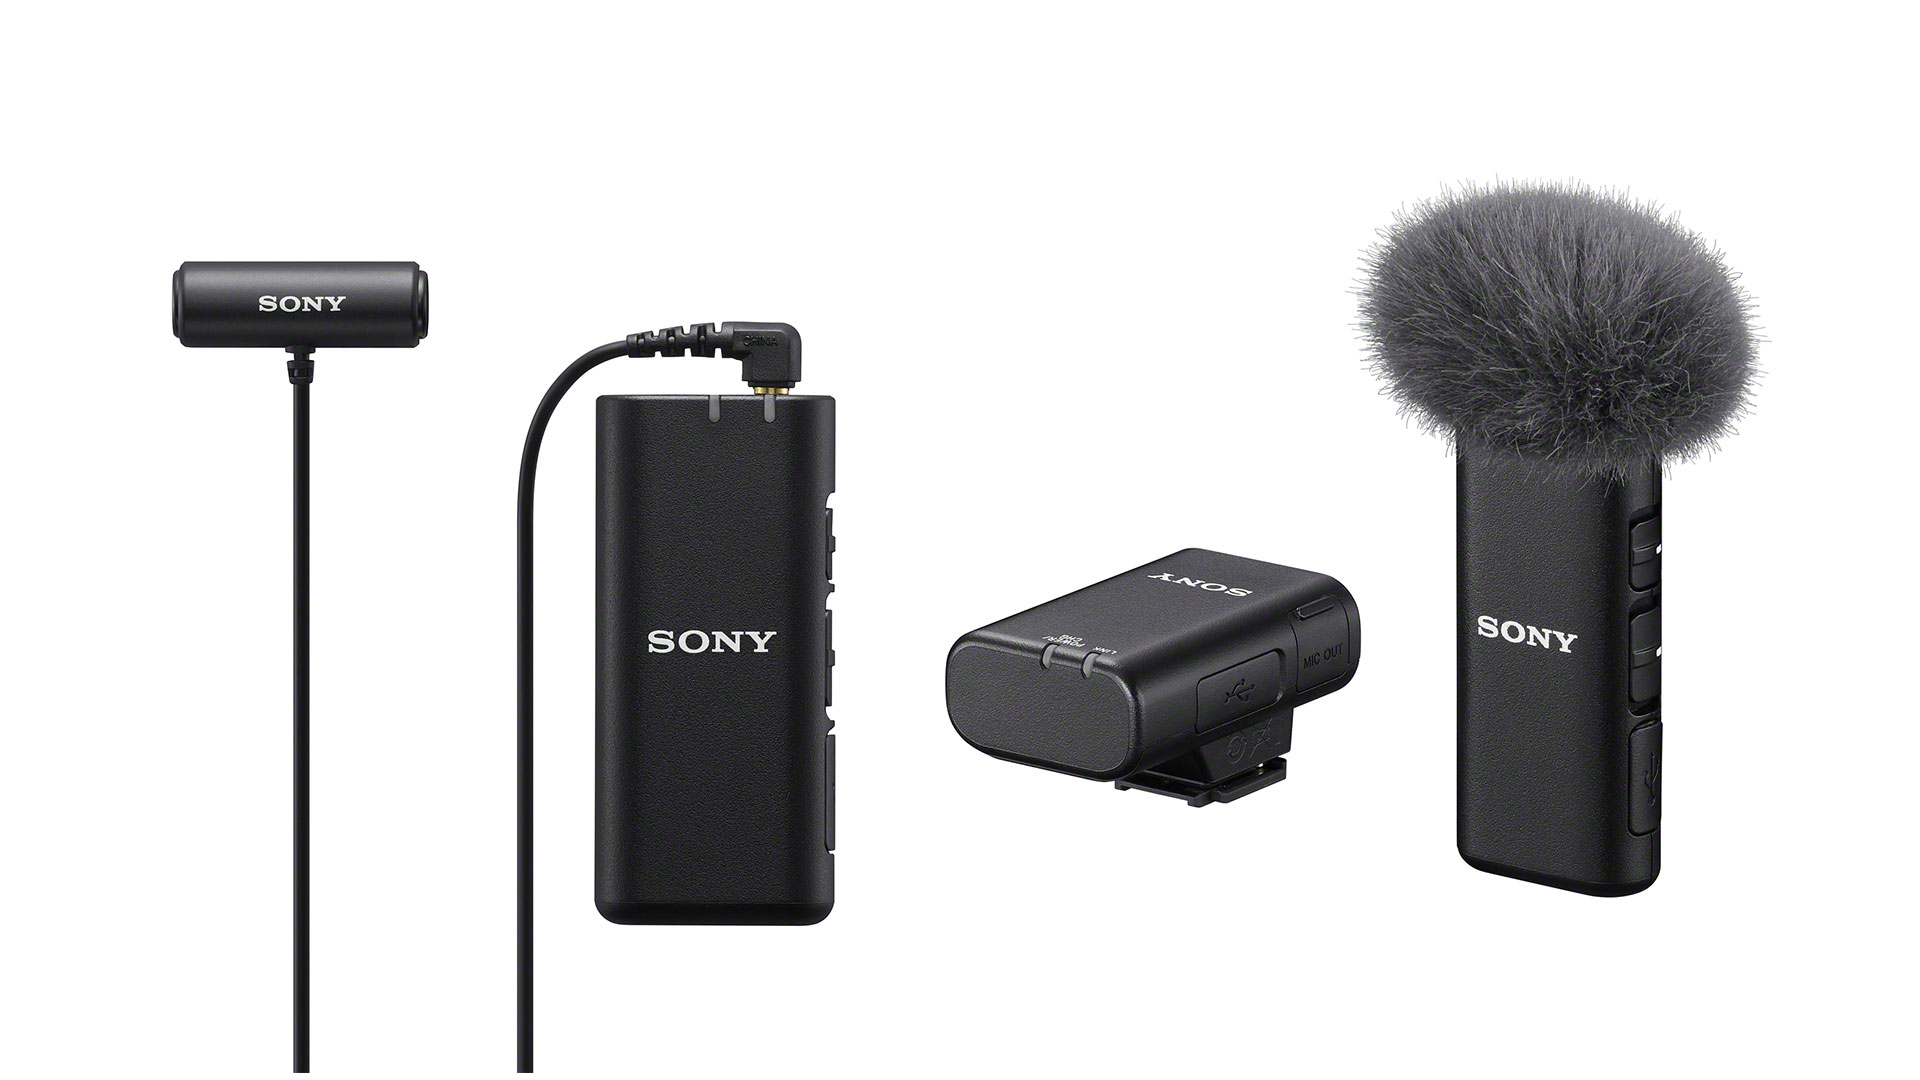 Sony ECM-W2BT Wireless Microphone and ECM-LV1 Compact Stereo 